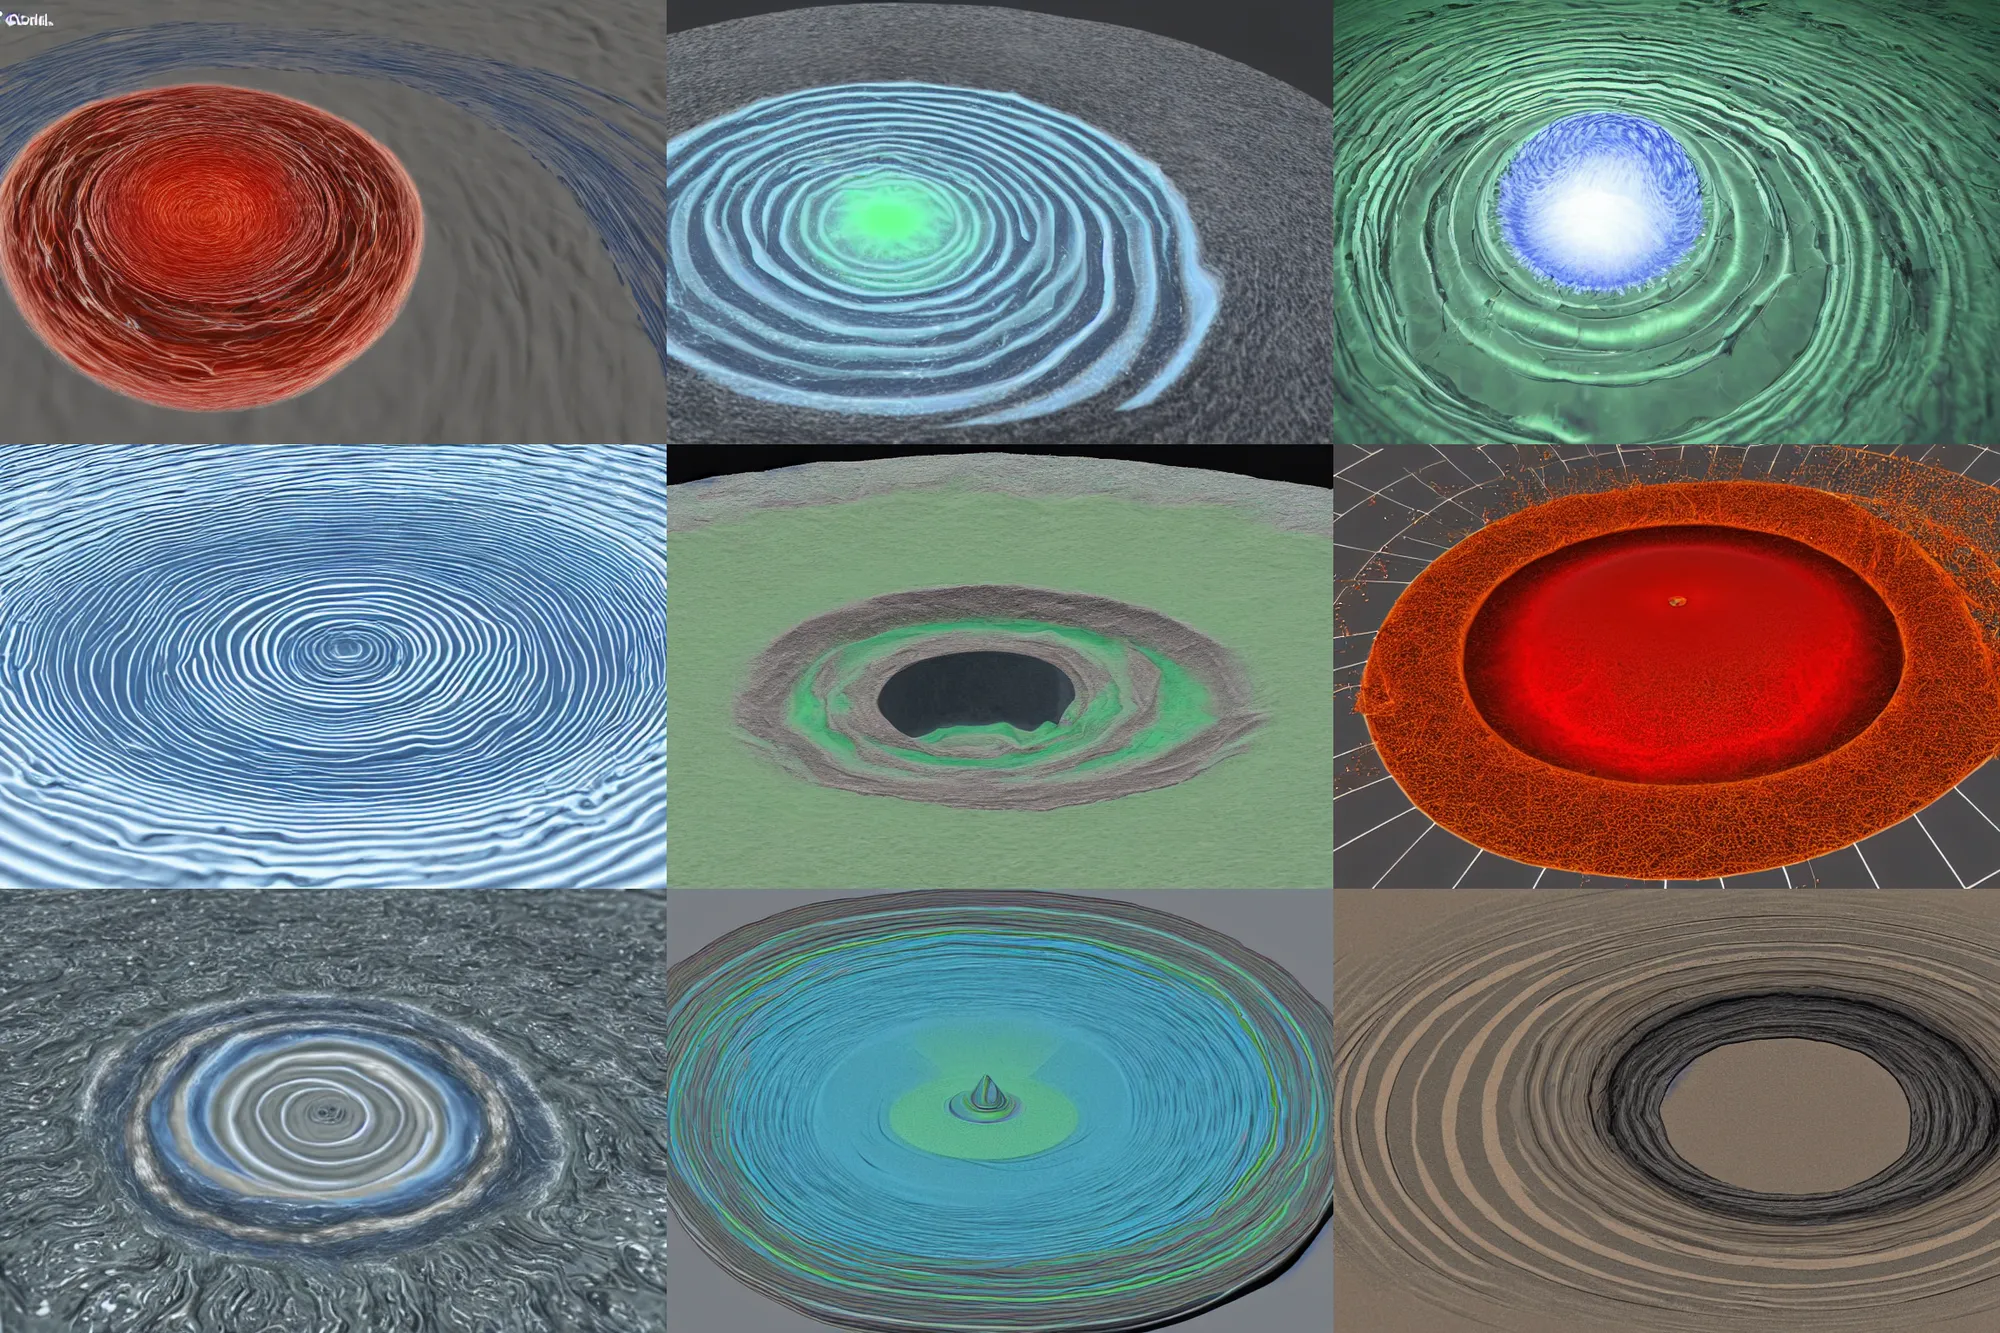 Prompt: two dimensional fluid simulation showing vortex shedding around a circular obstacle